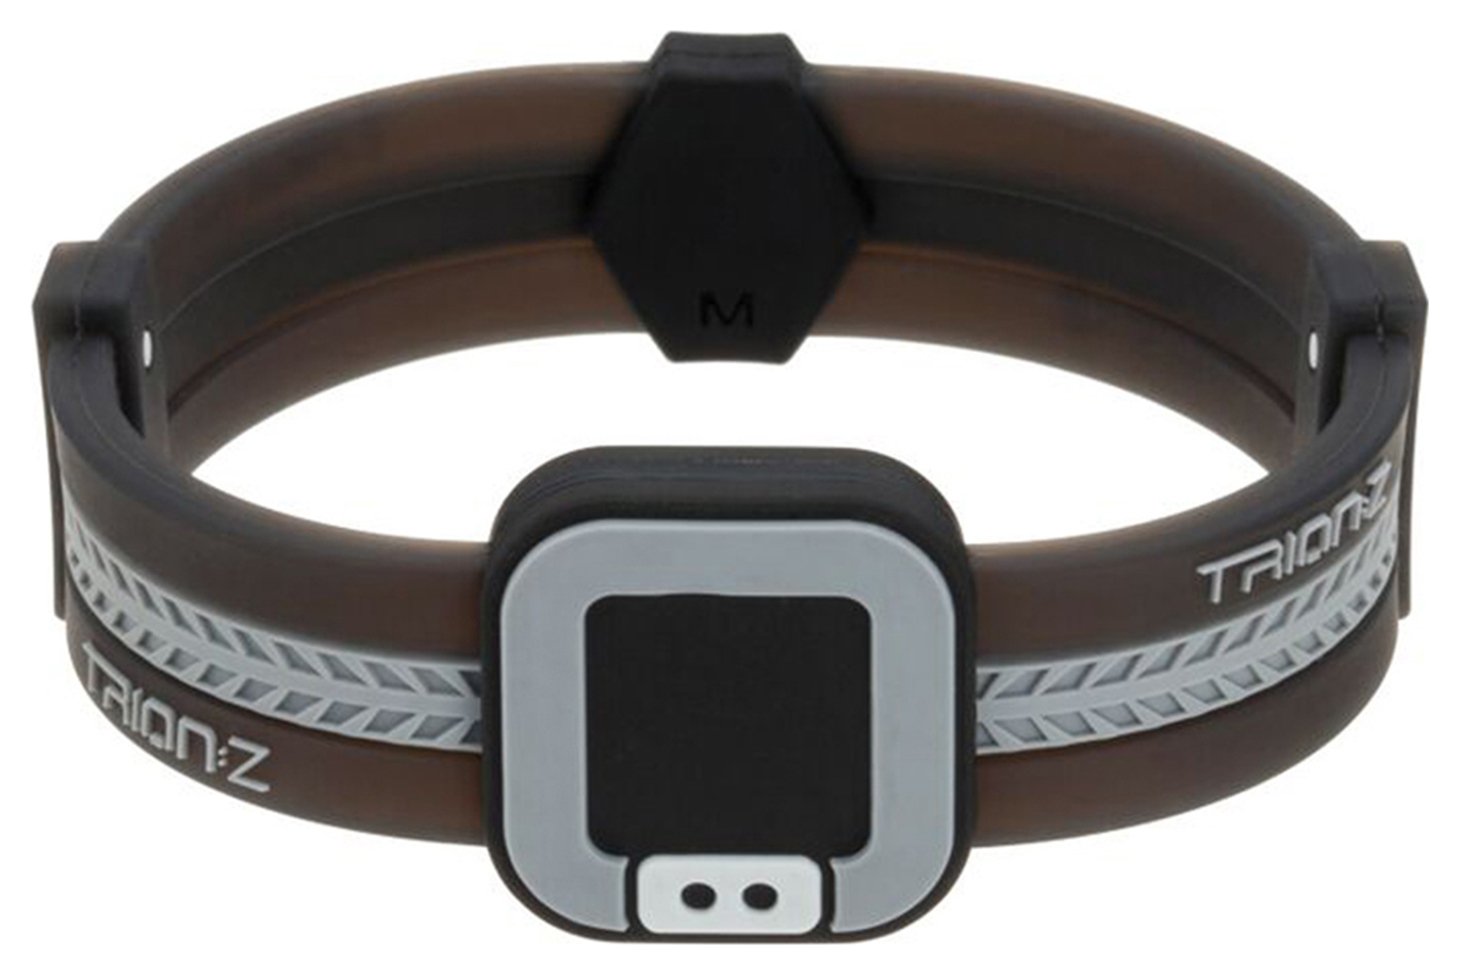 Trion - Z Acti-Loop Small Wristband Review